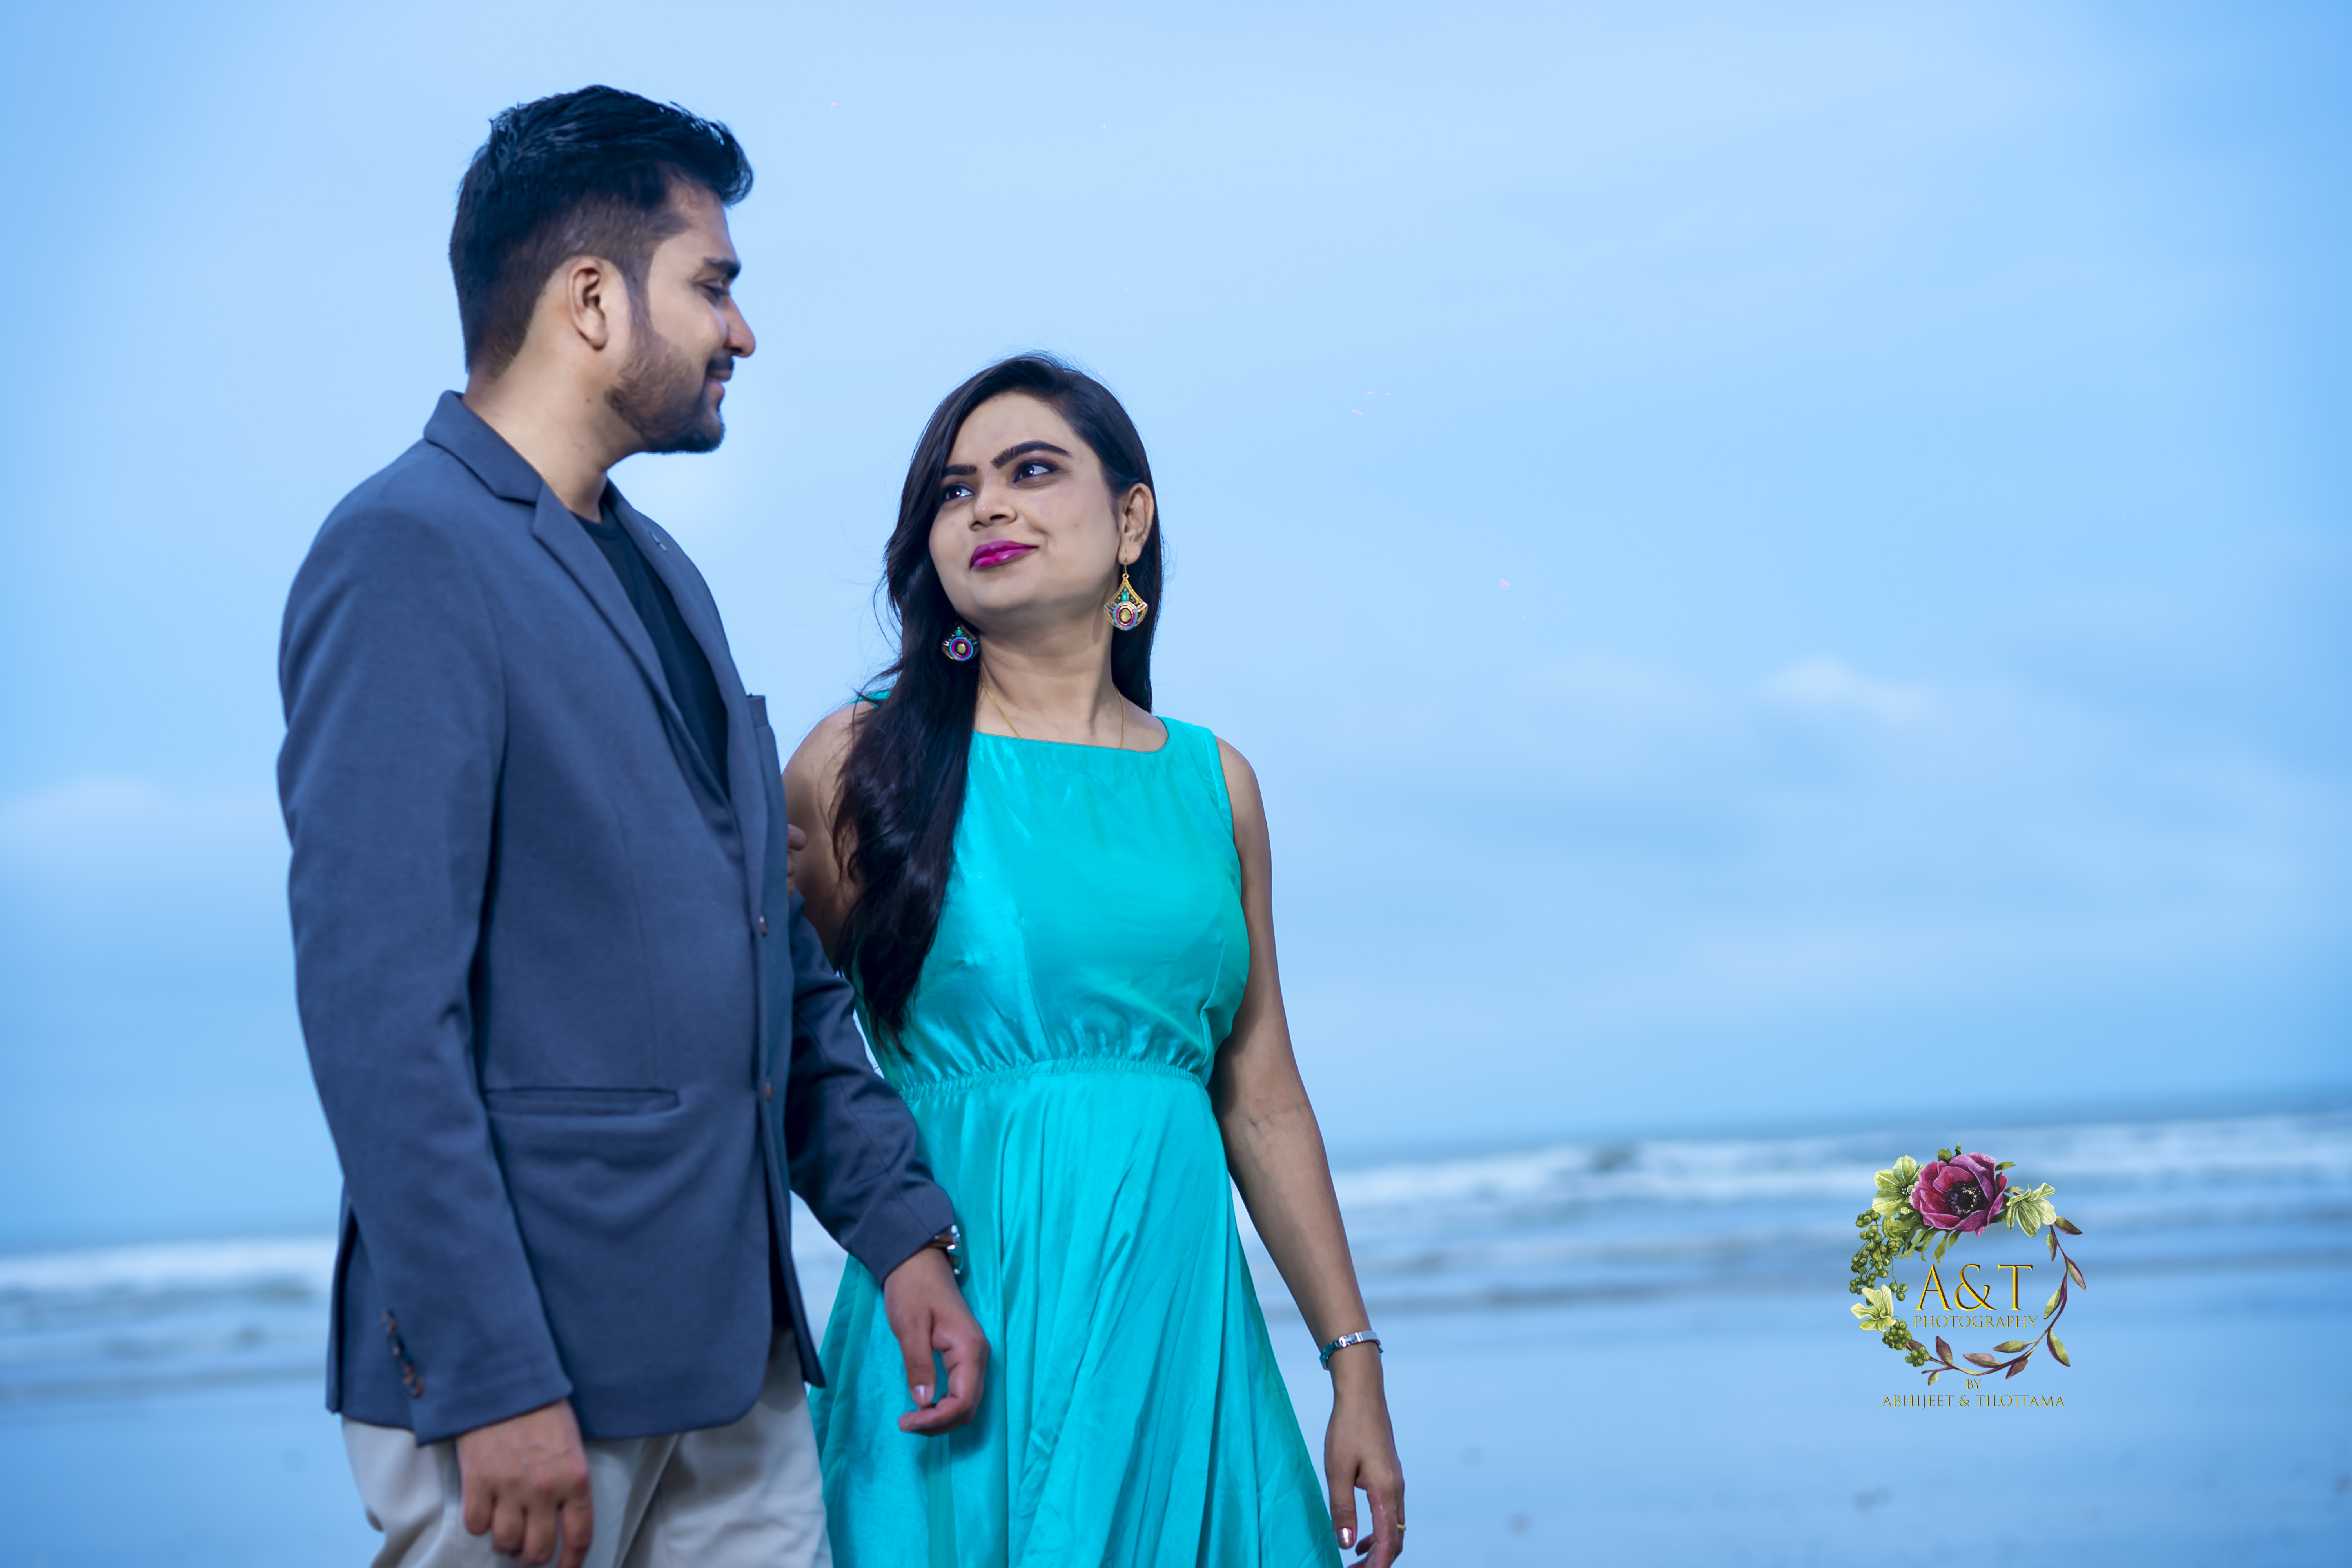 Monil & Vandana walking on beach in the beautiful outfits|Shot clicked by best pre-wedding photographer in Pune